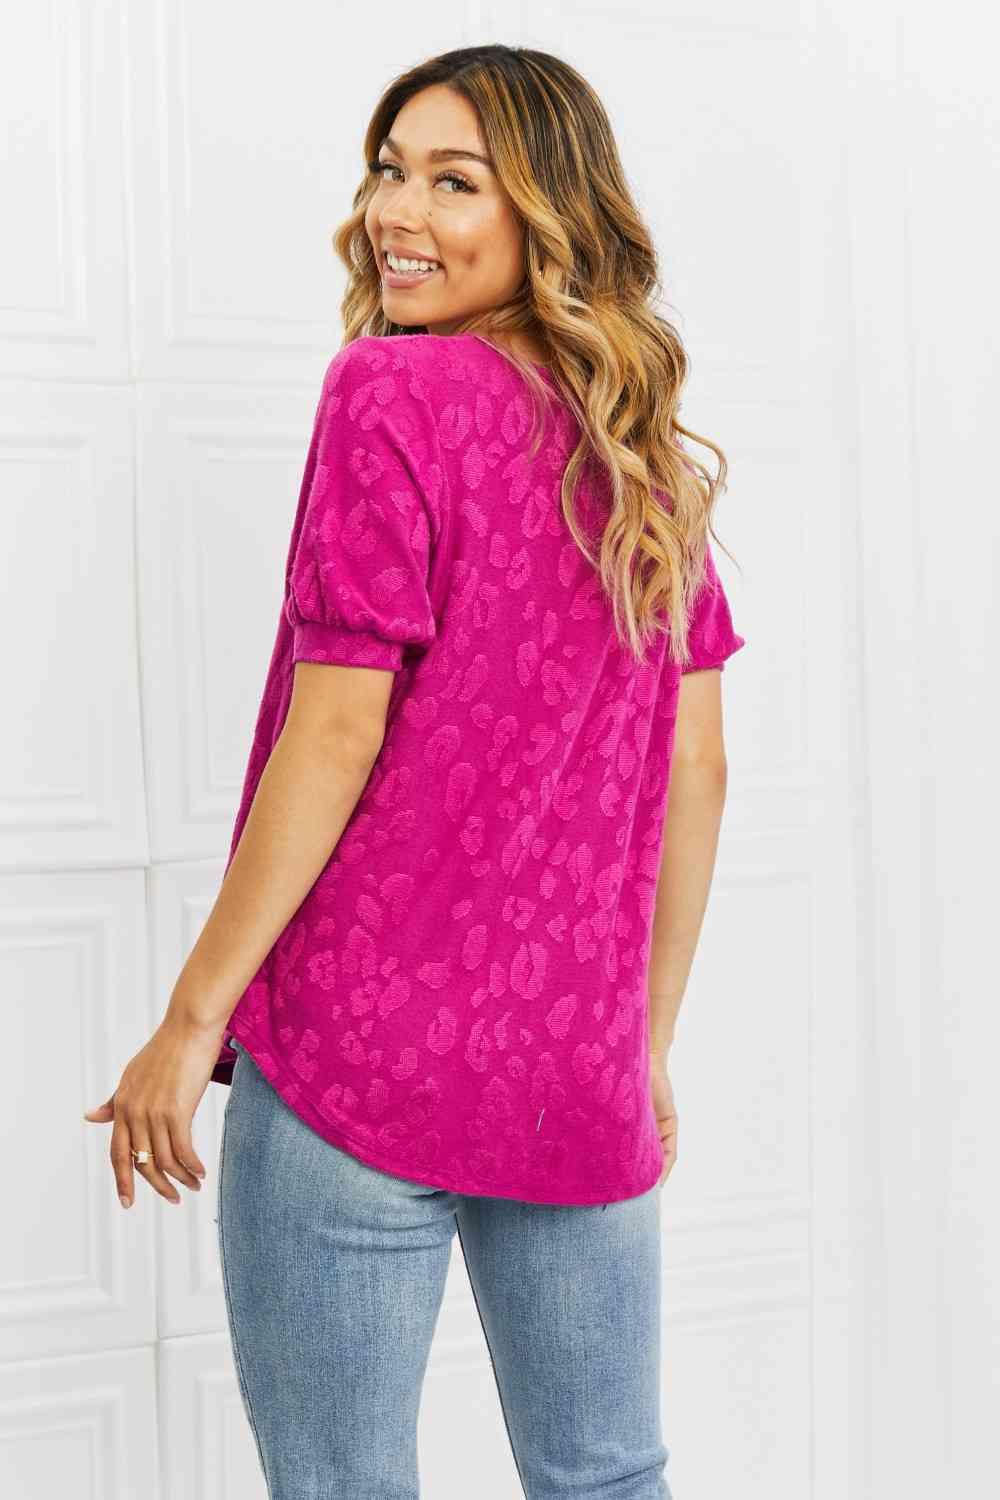 BOMBOM Carnival Vibes Animal Textured Top - Immenzive